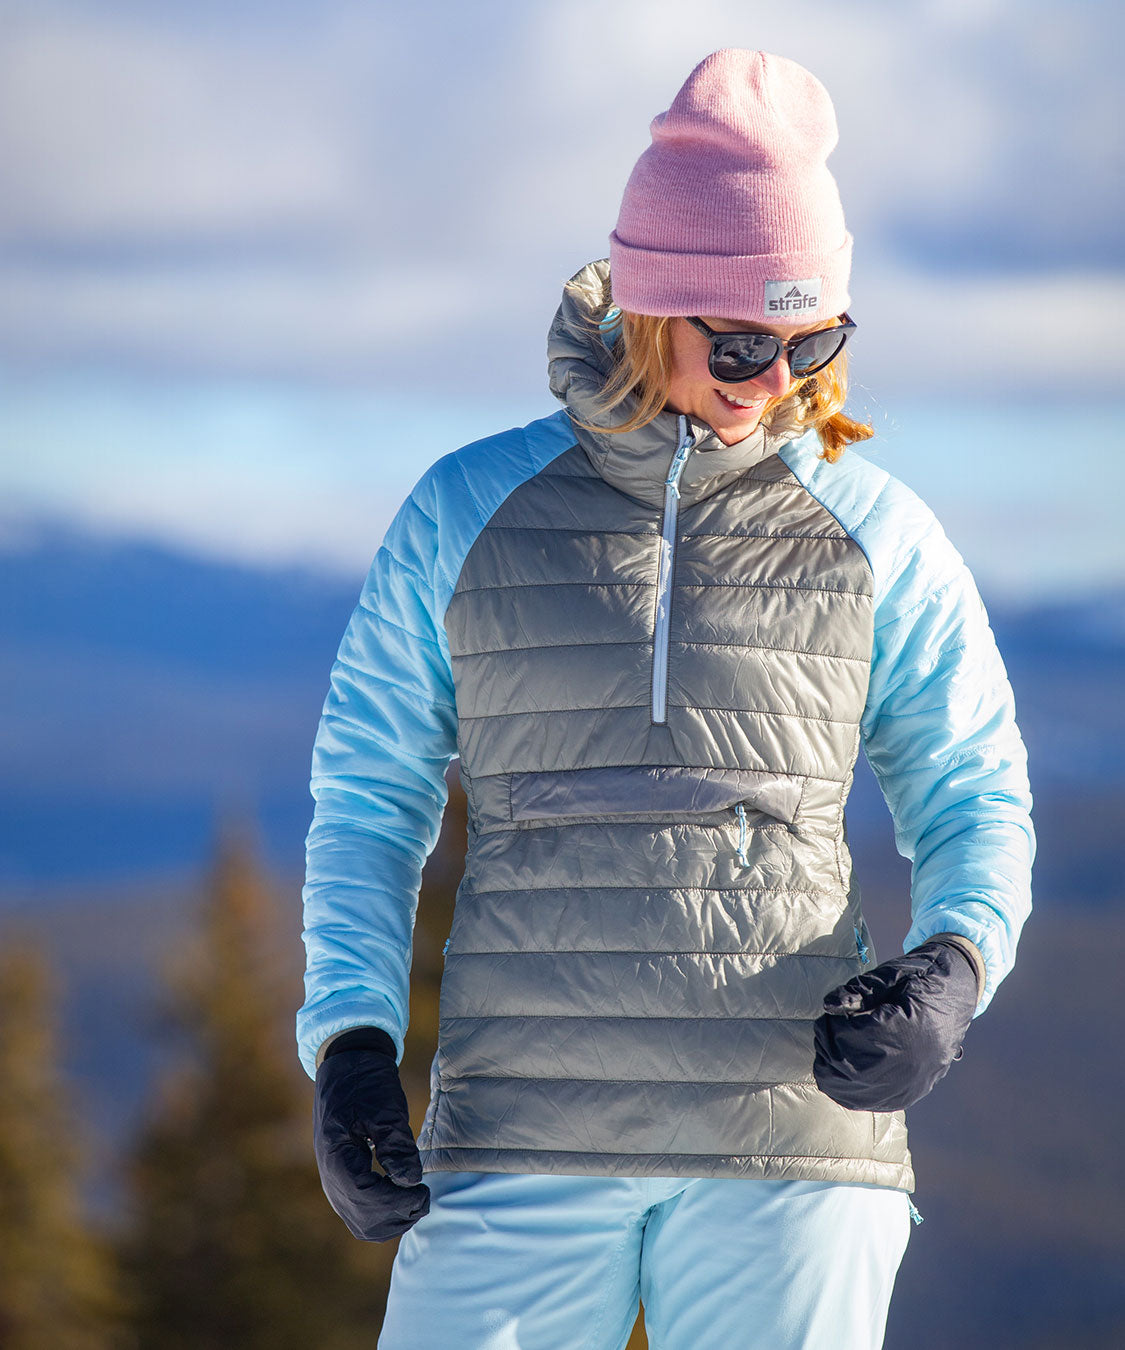 another look at woman in aero pullover standing in snow